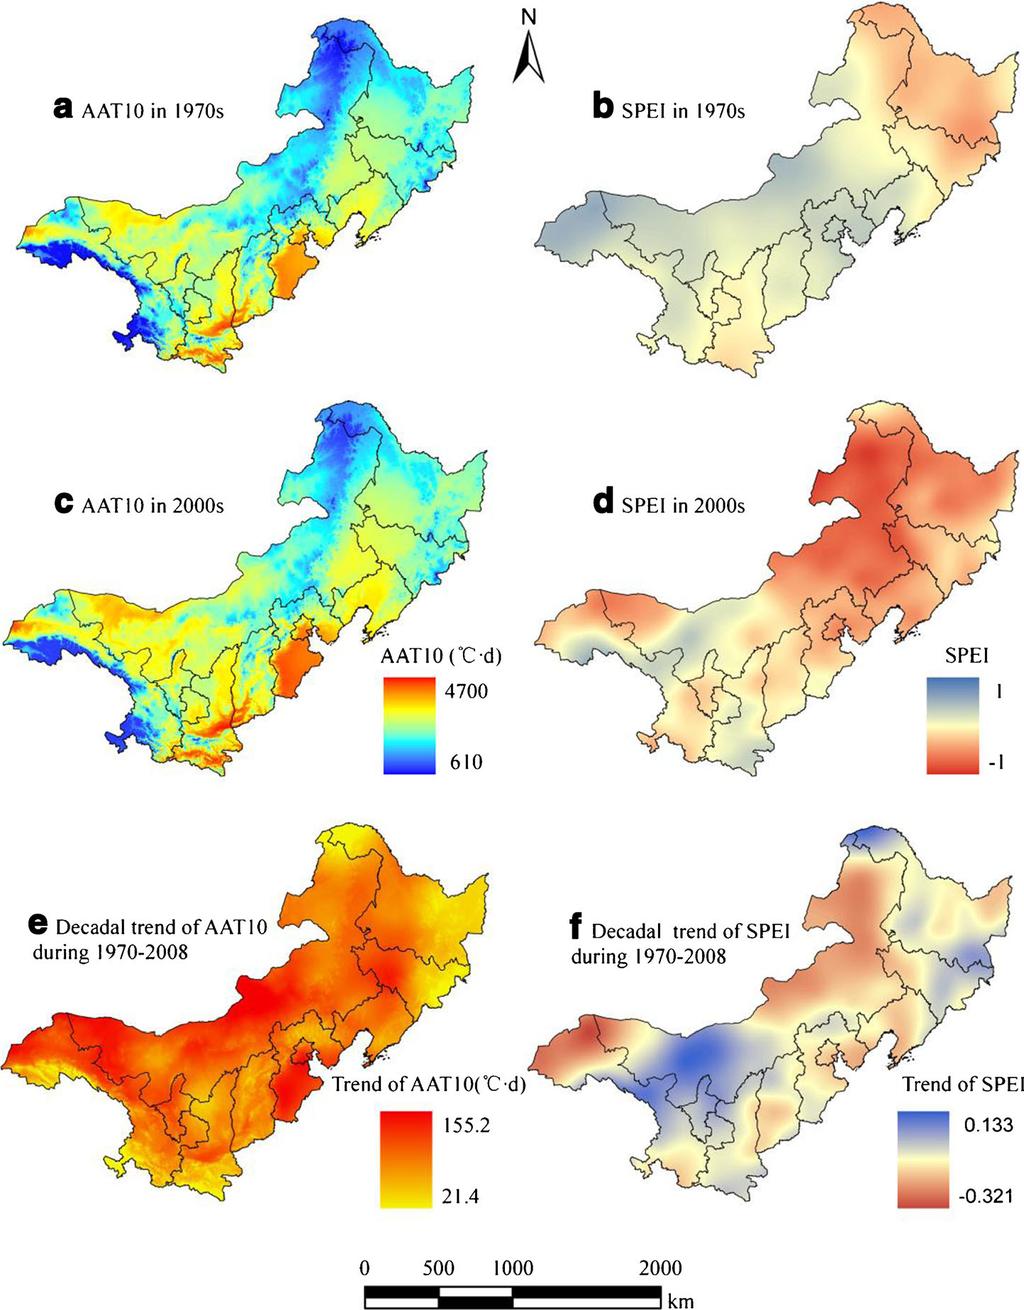 Fig. 2 Spatial distributions of the active accumulated temperatures 10 C (AAT10) and the standardized precipitation evapotranspiration index (SPEI) in the 1970s and the 2000s, and the decadal trends